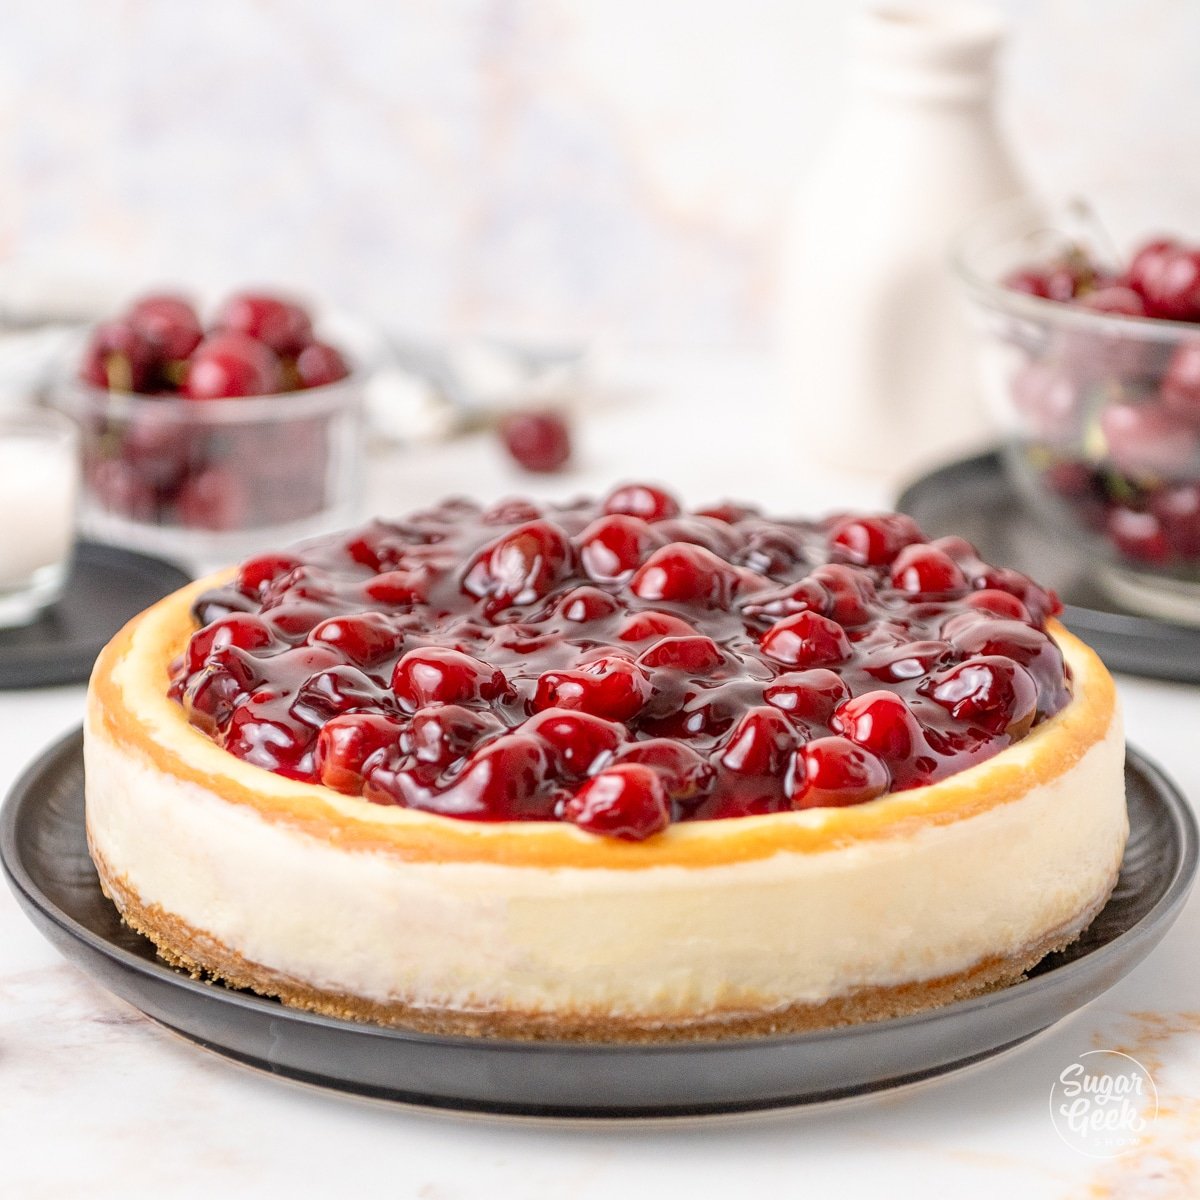 A cheesecake with cherry topping on a black plate